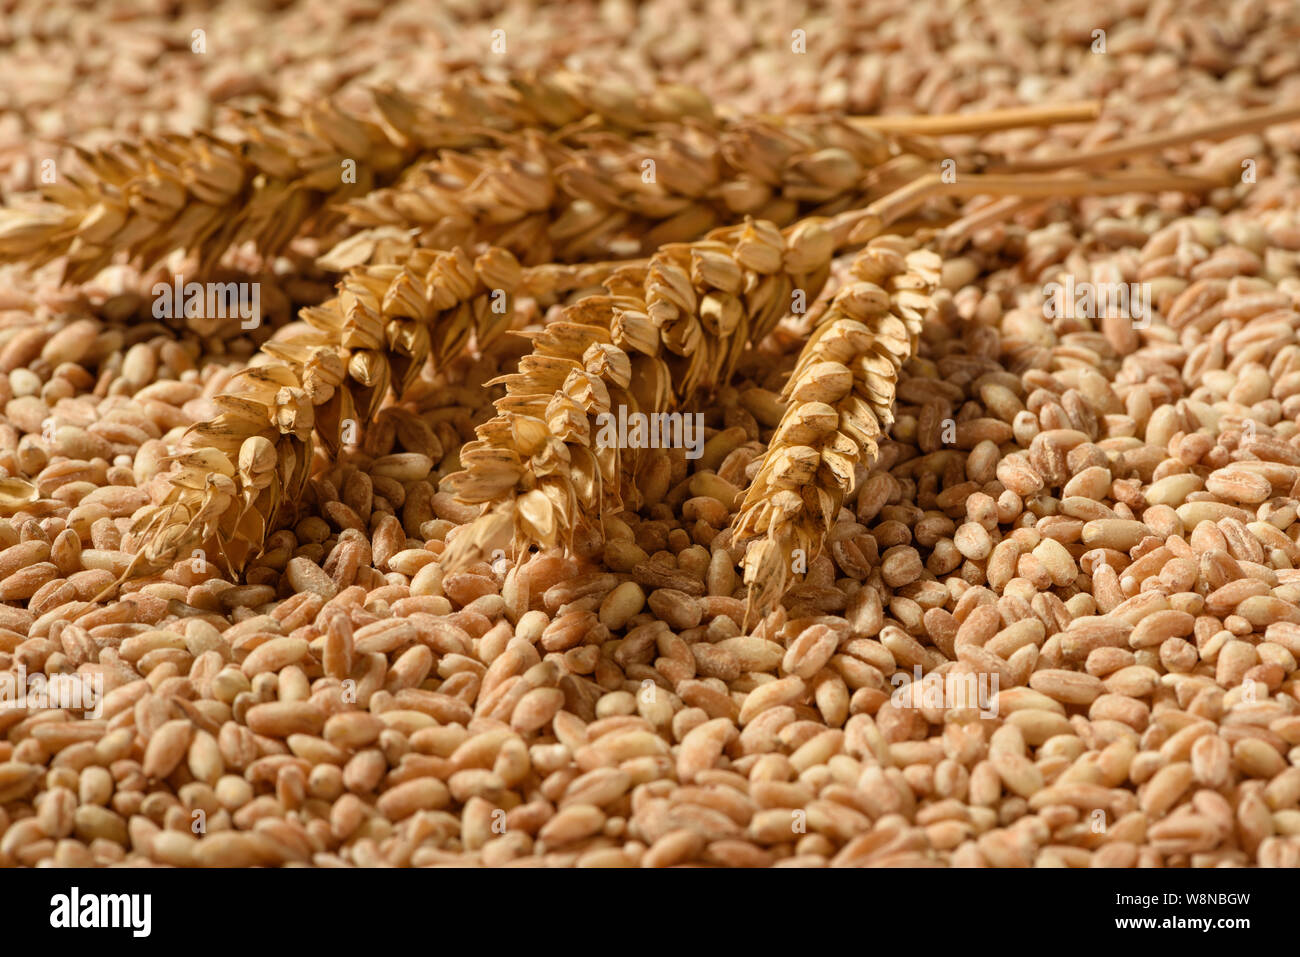 Spikelets of organic spelt are found on wheat grains. Stock Photo